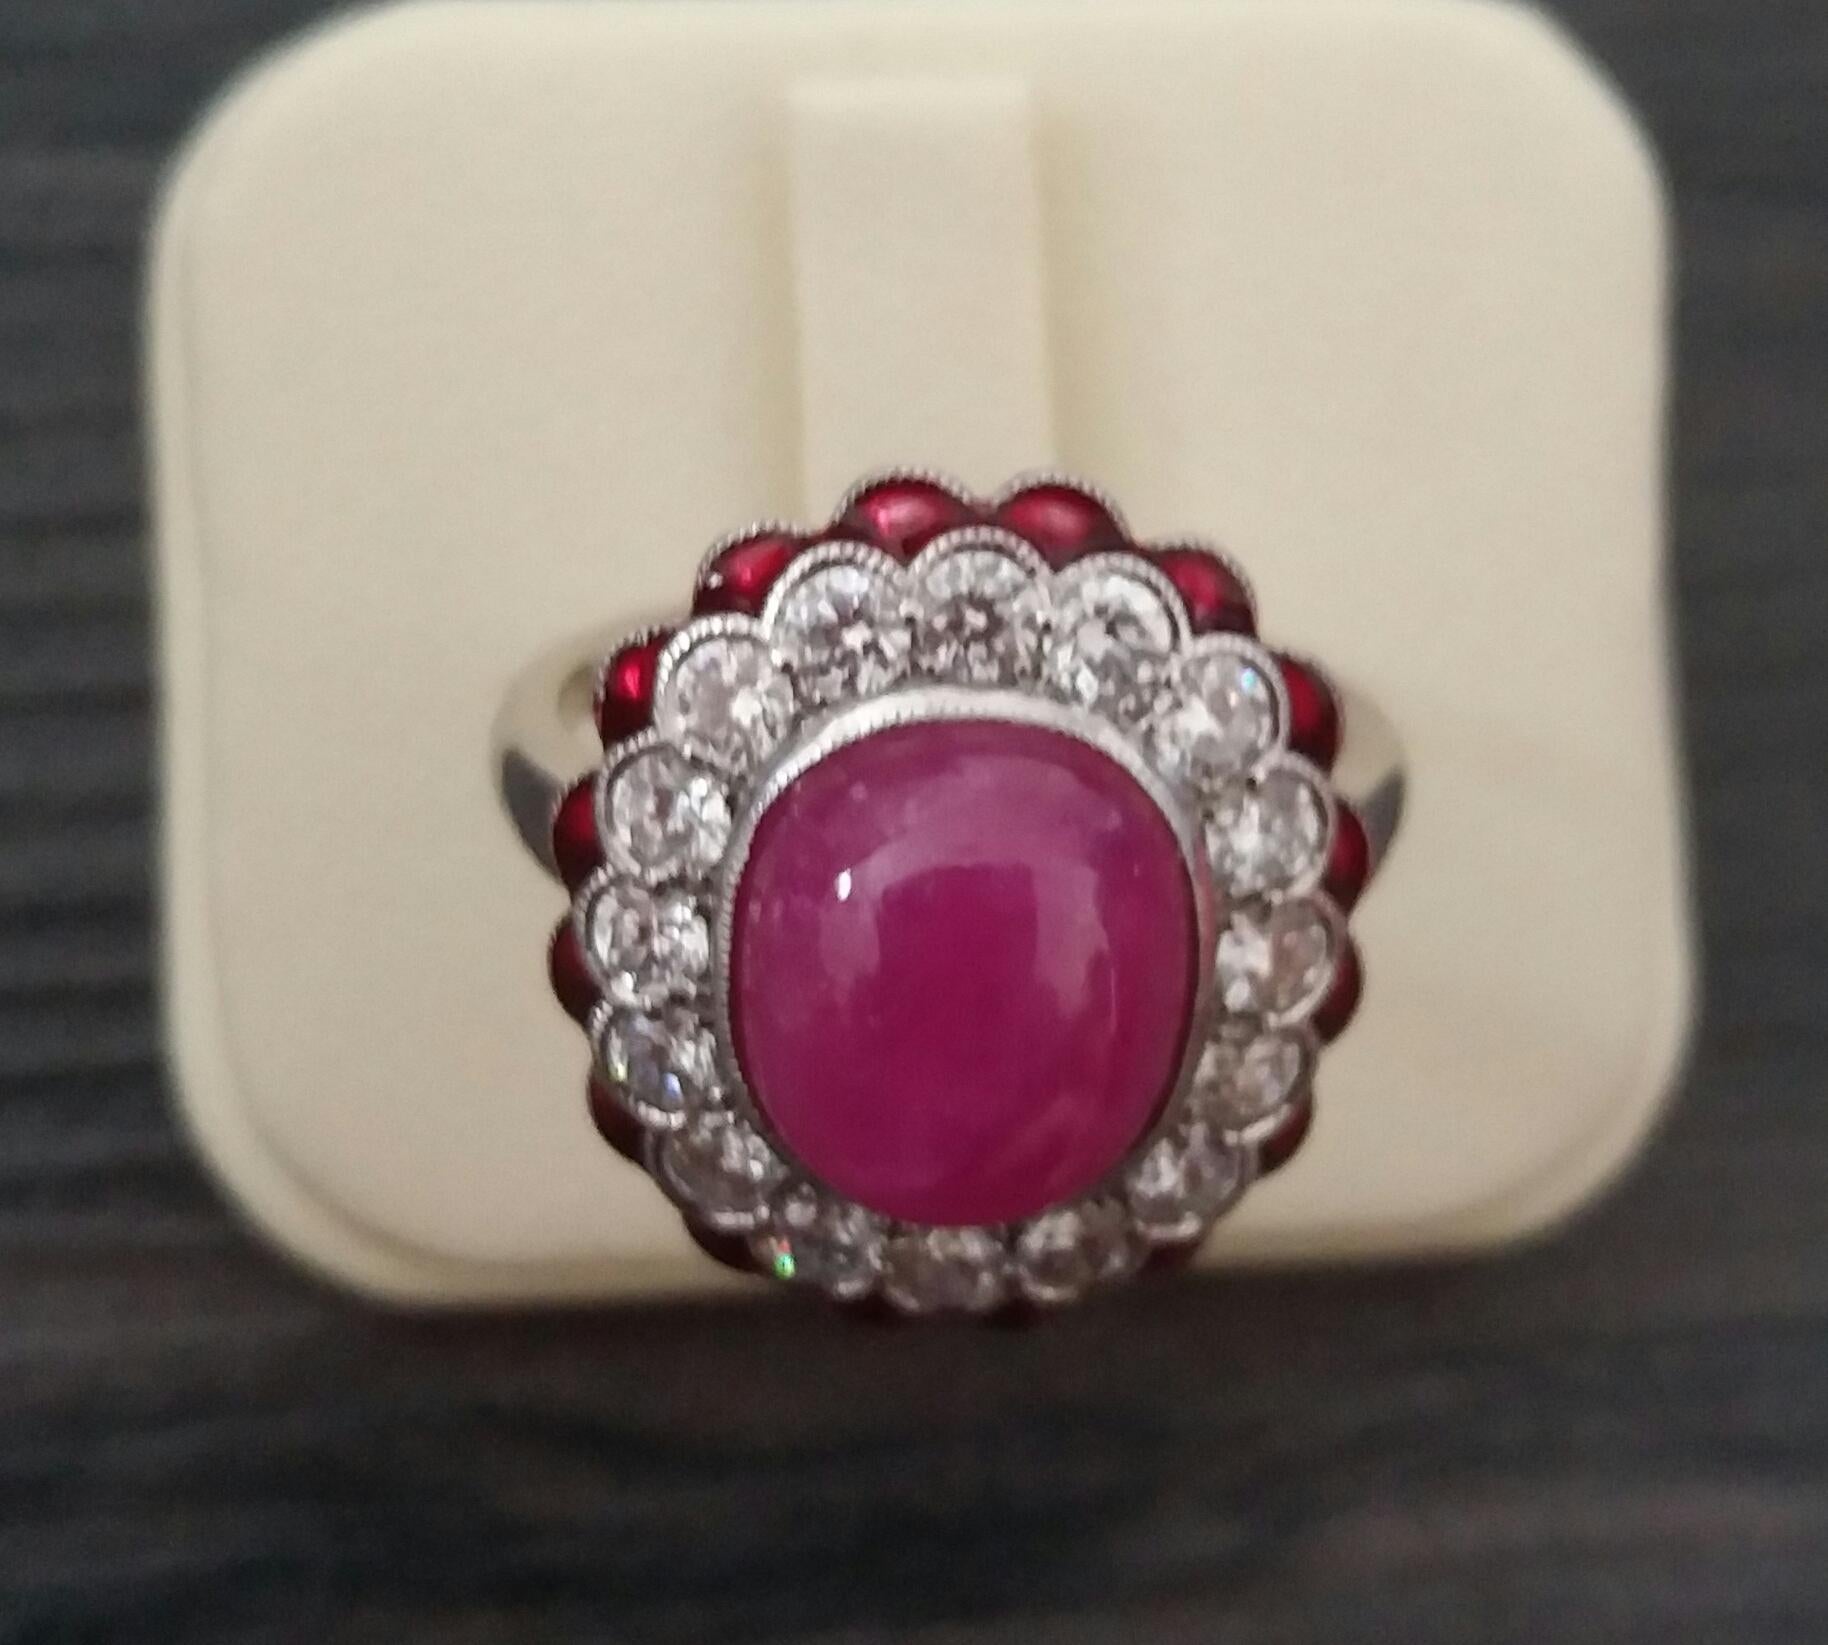 10 Carat Oval Ruby Cab 1 Carat Diamonds Red Enamel 14K White Gold Cocktail Ring For Sale 2